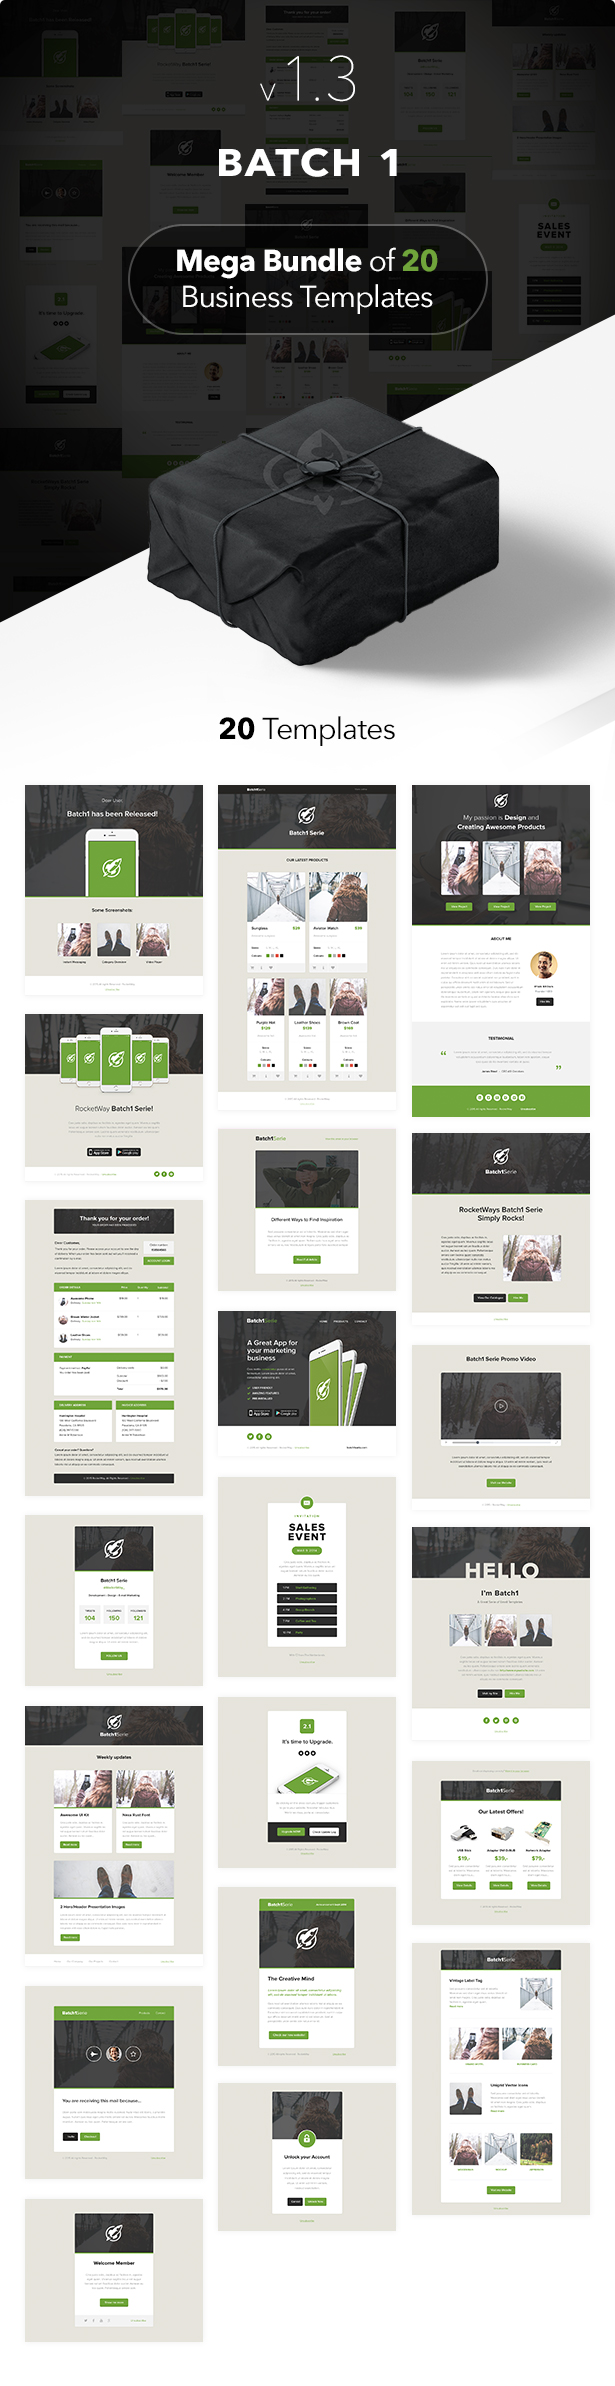 Batch1 - Complete Set of 20 Business Email Templates - 1